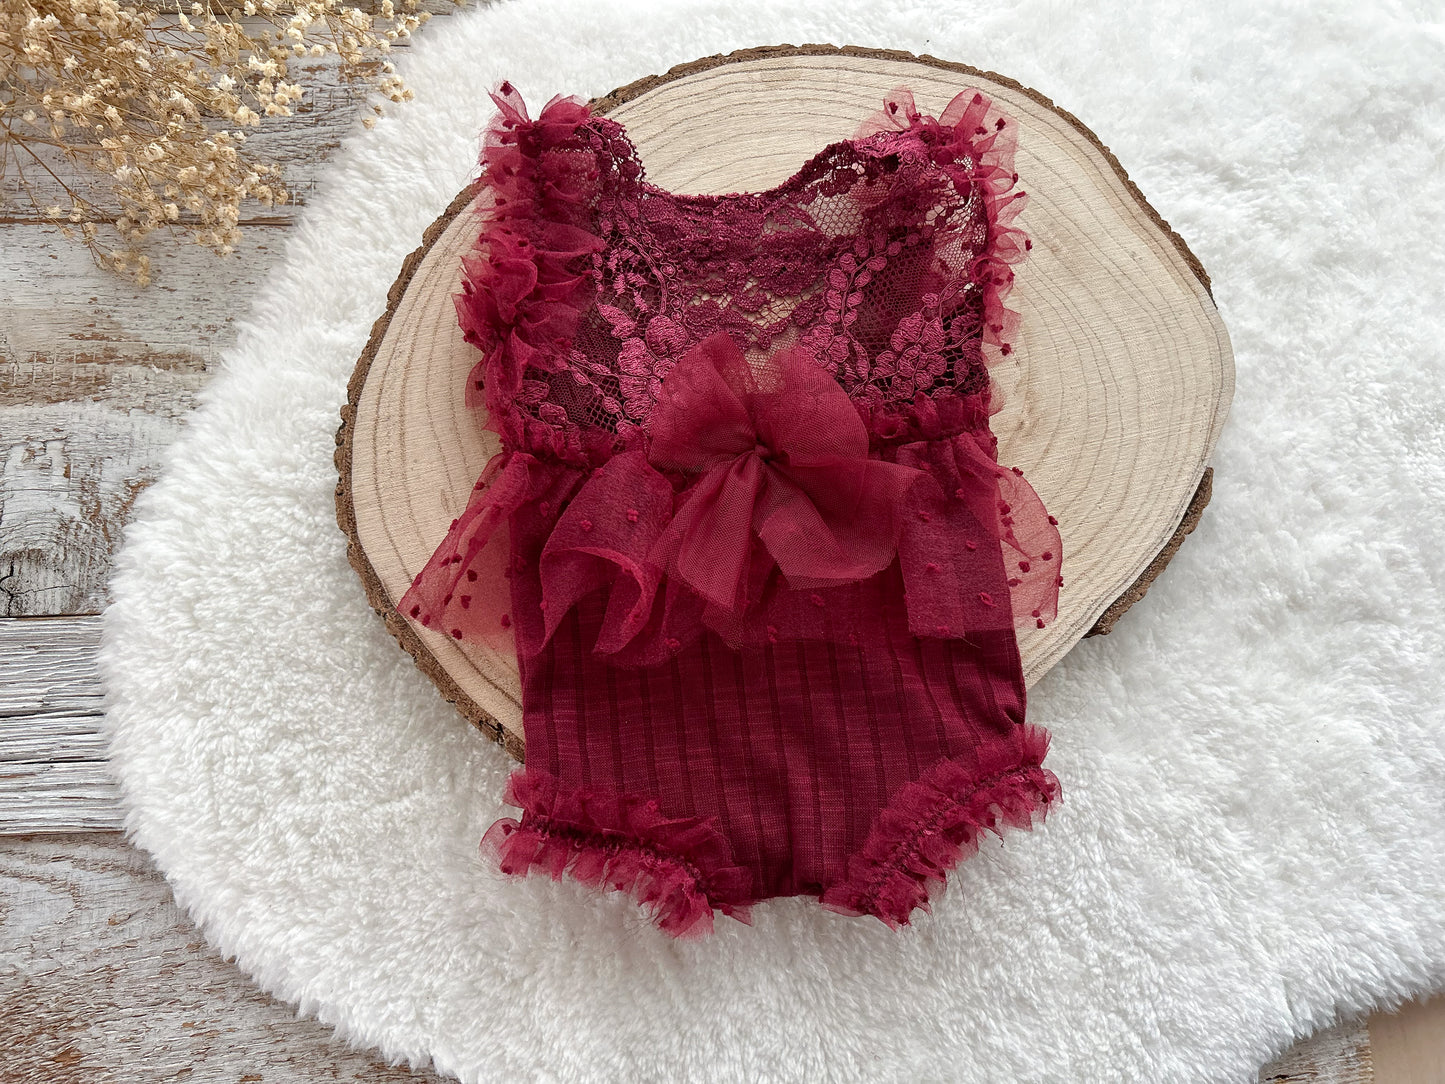 Newborn Photography Romper Baby Girl Lace Outfit For First Photo Shoot Christmas Newborn Outfit Prop